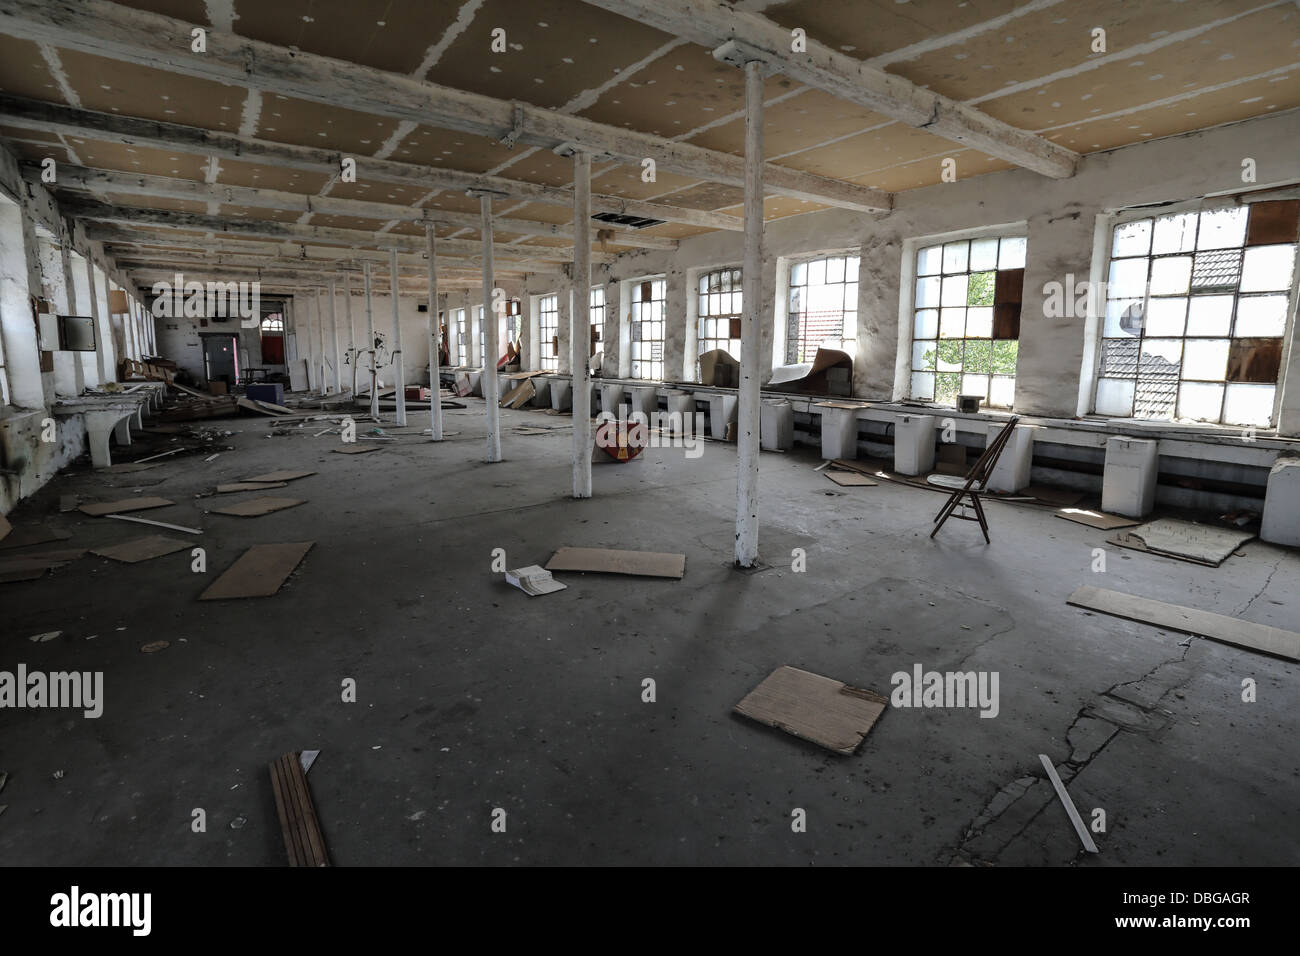 Abandoned factory with broken stuffs on the ground like chairs and wood panels. nobody. Stock Photo